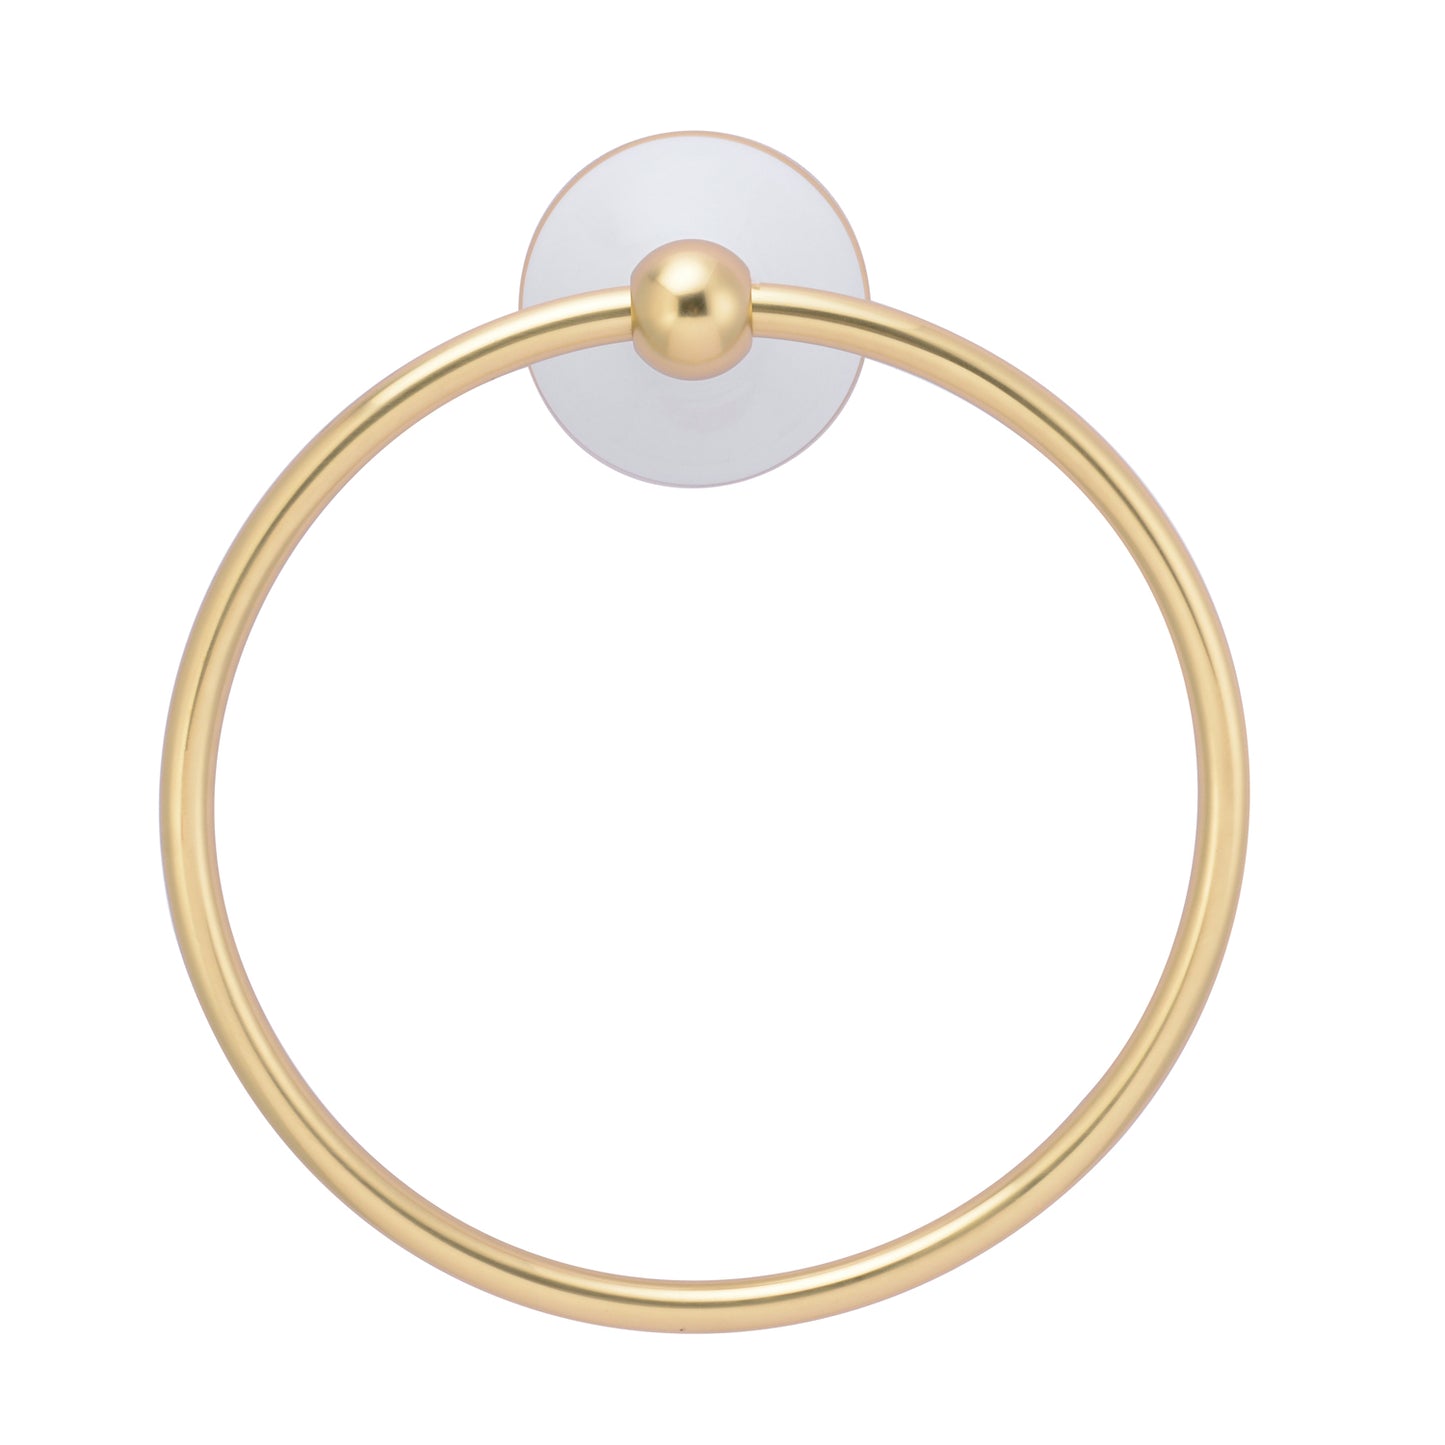 Anja Towel Ring in Antique Brass